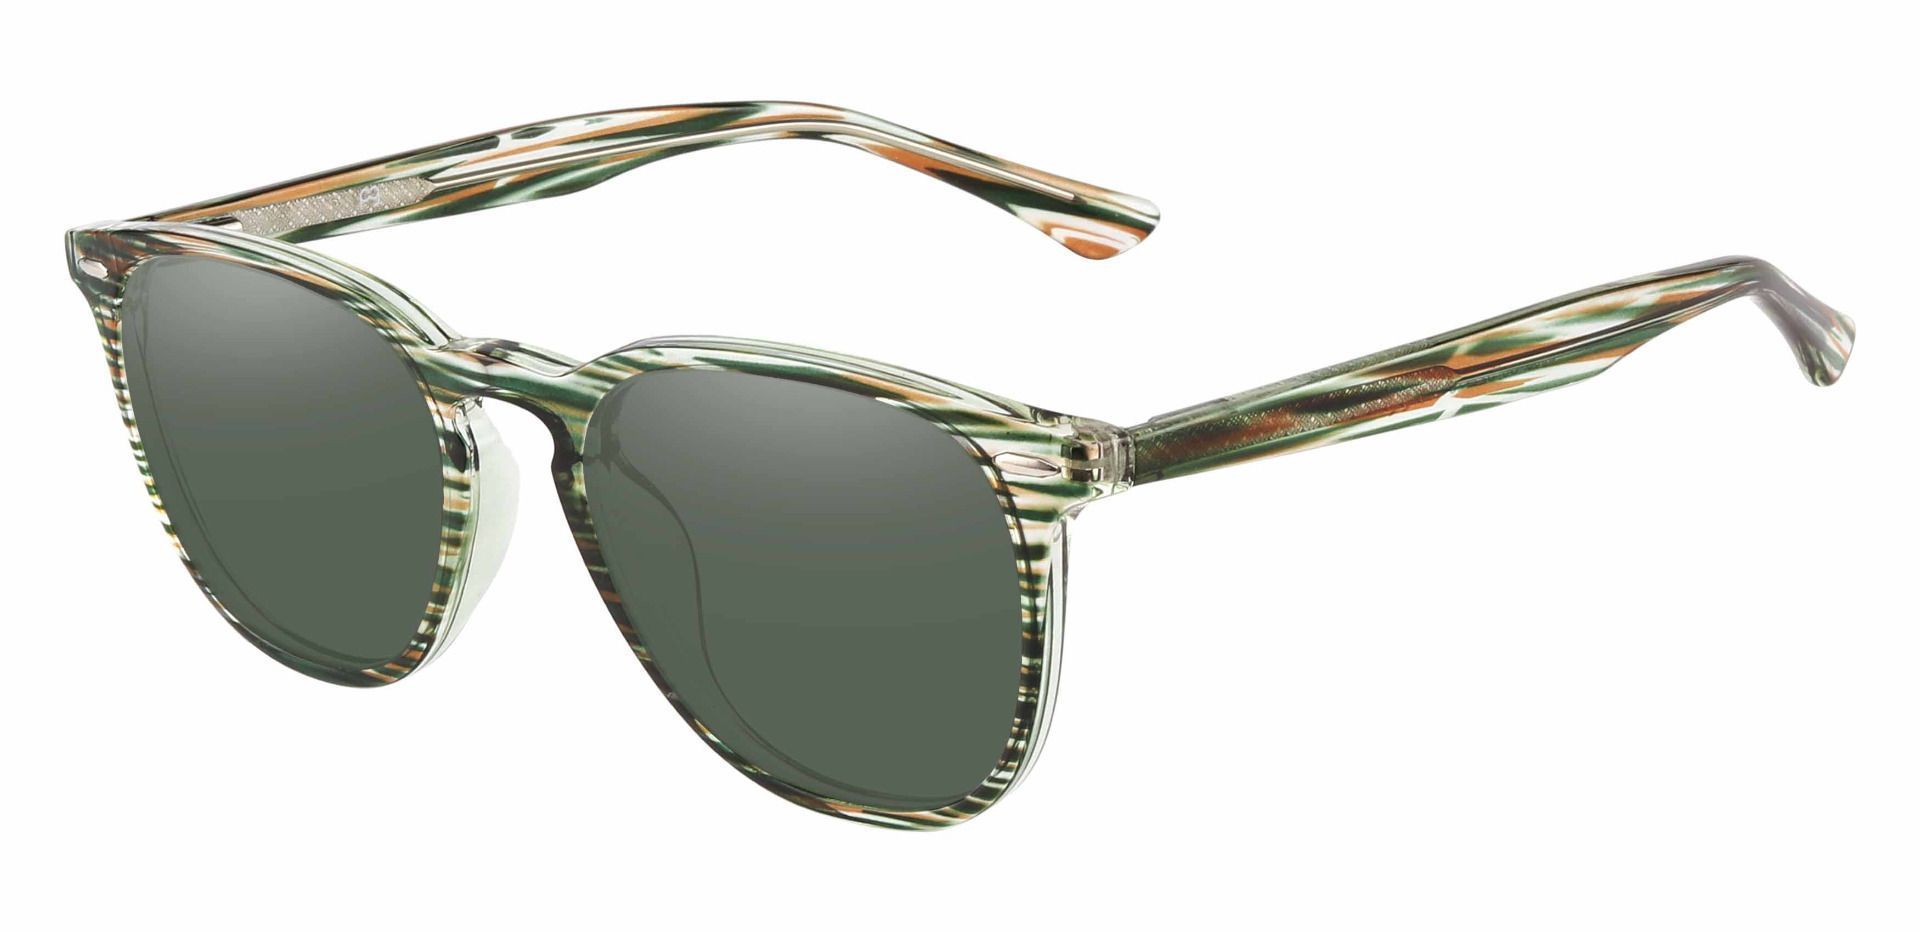 Sycamore Oval Prescription Sunglasses - Green Frame With Green Lenses